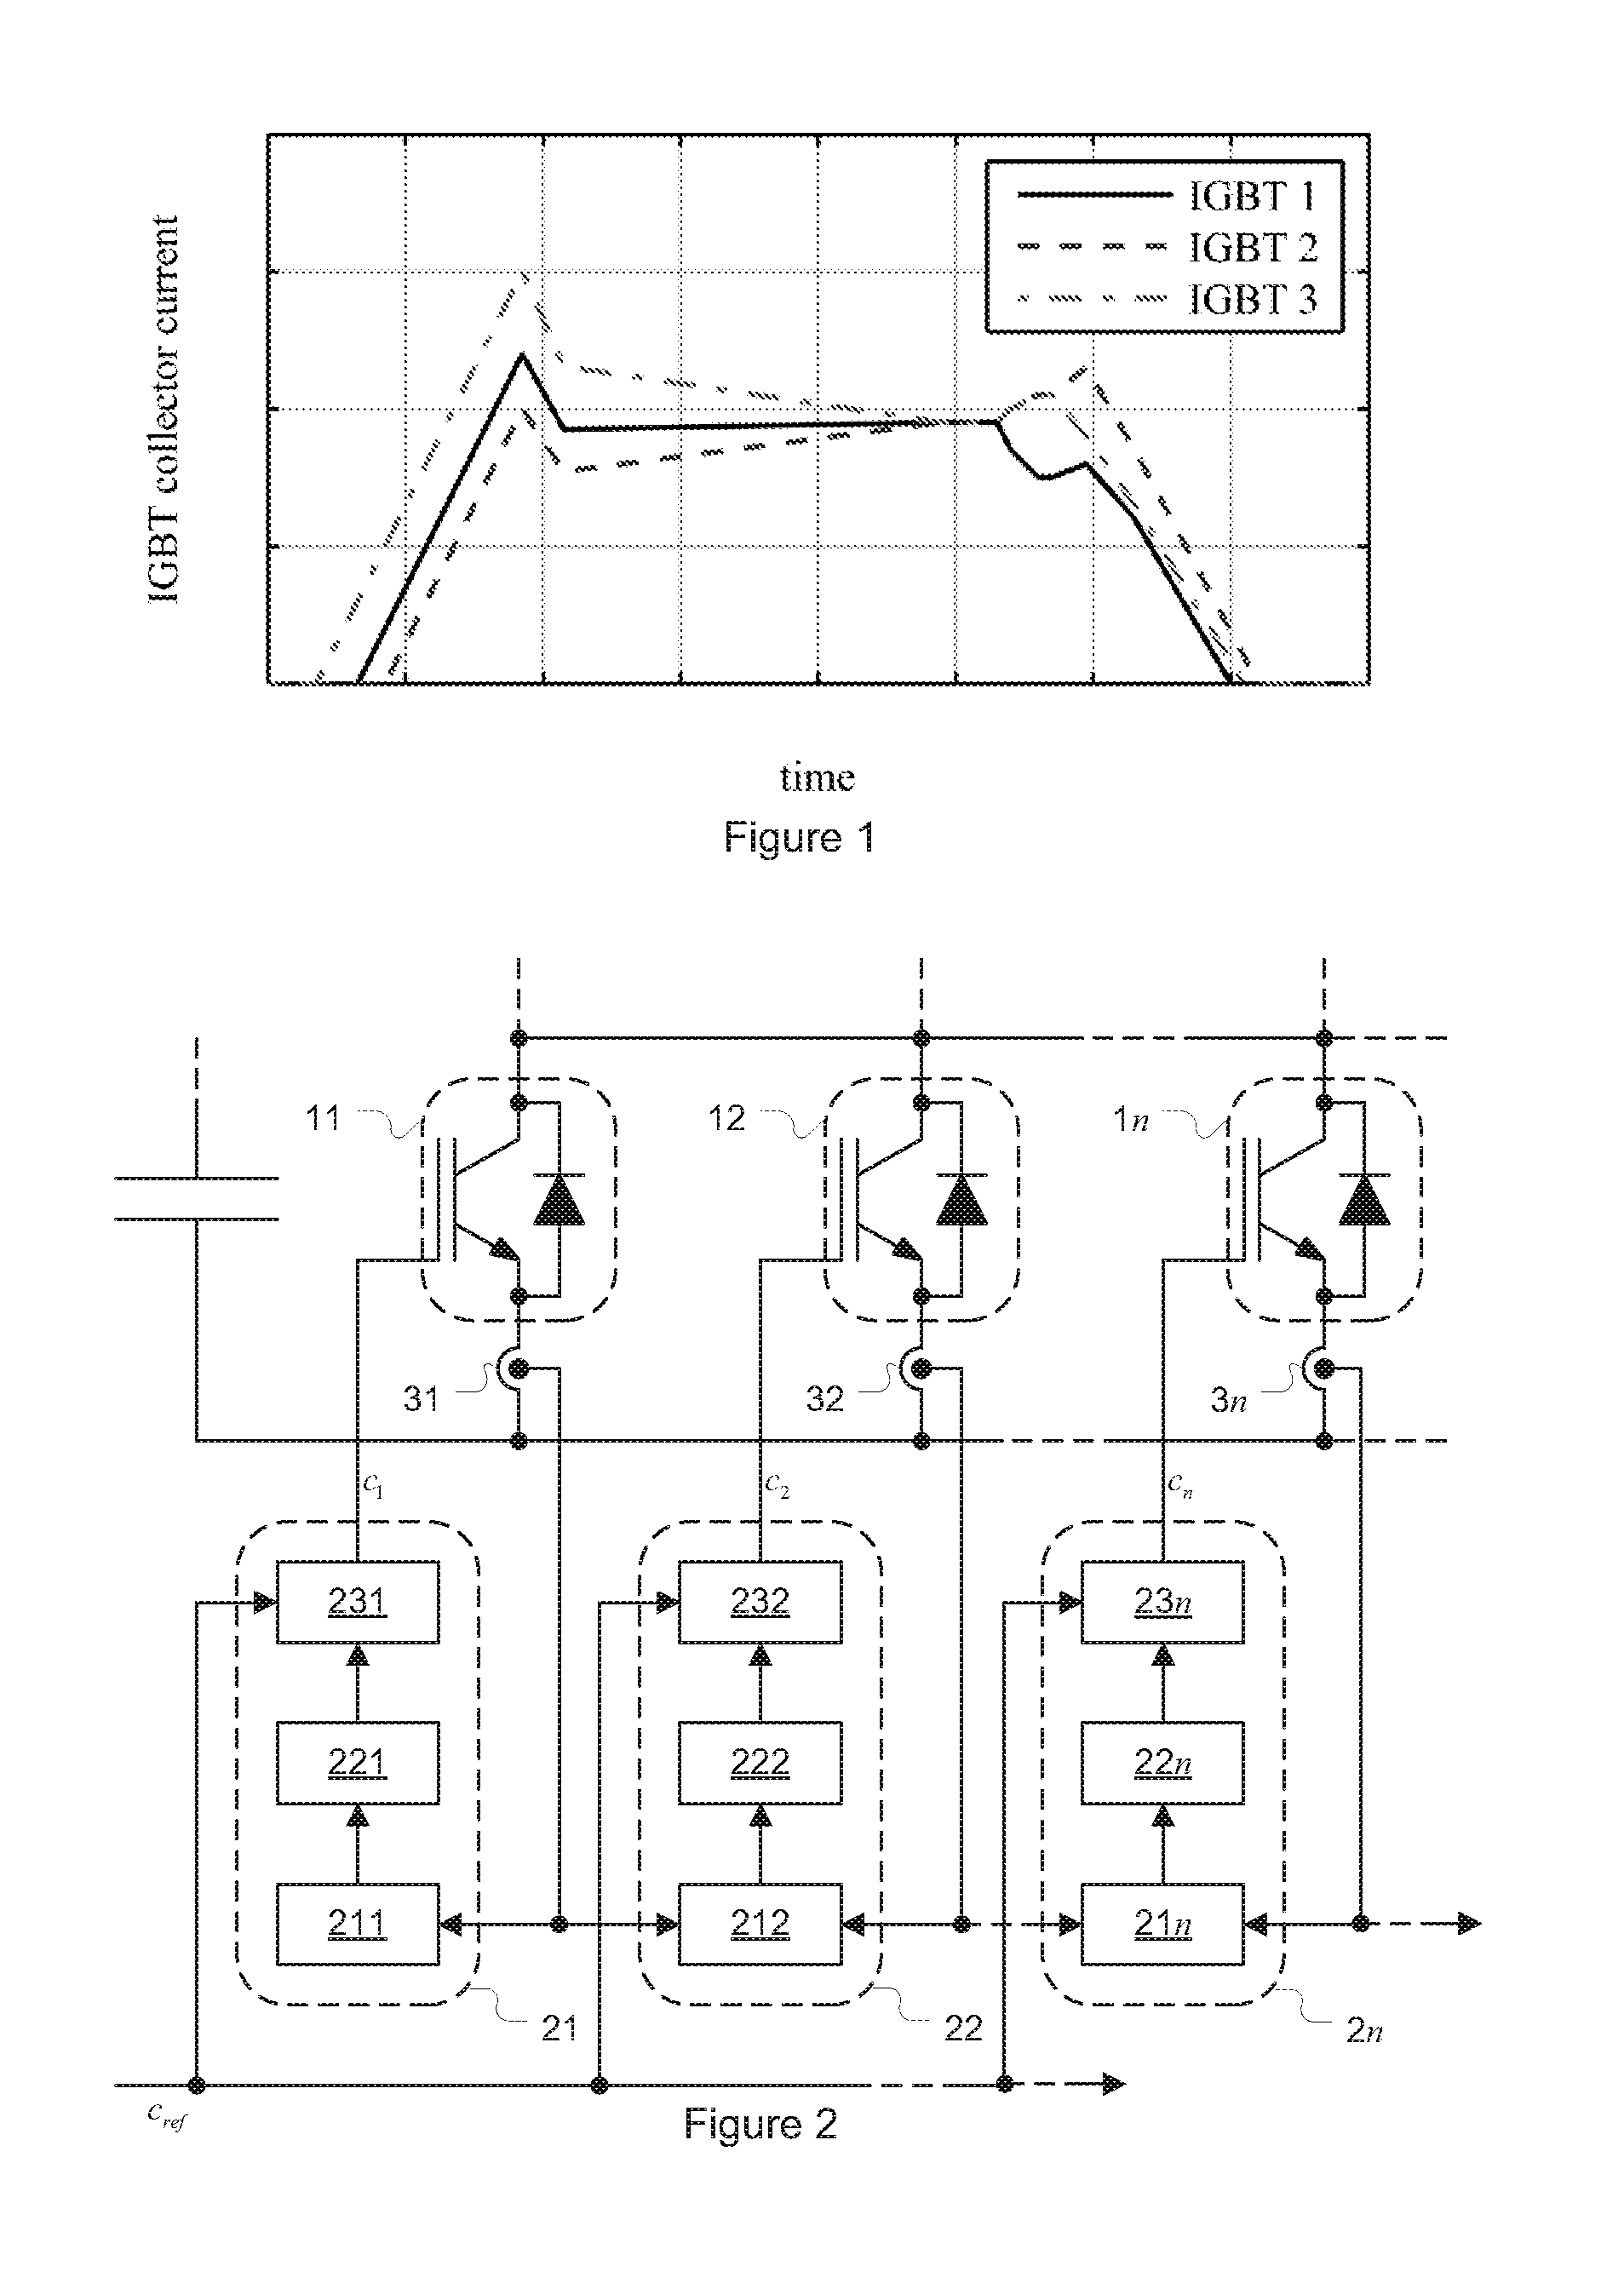 Gate driver unit for electrical switching device